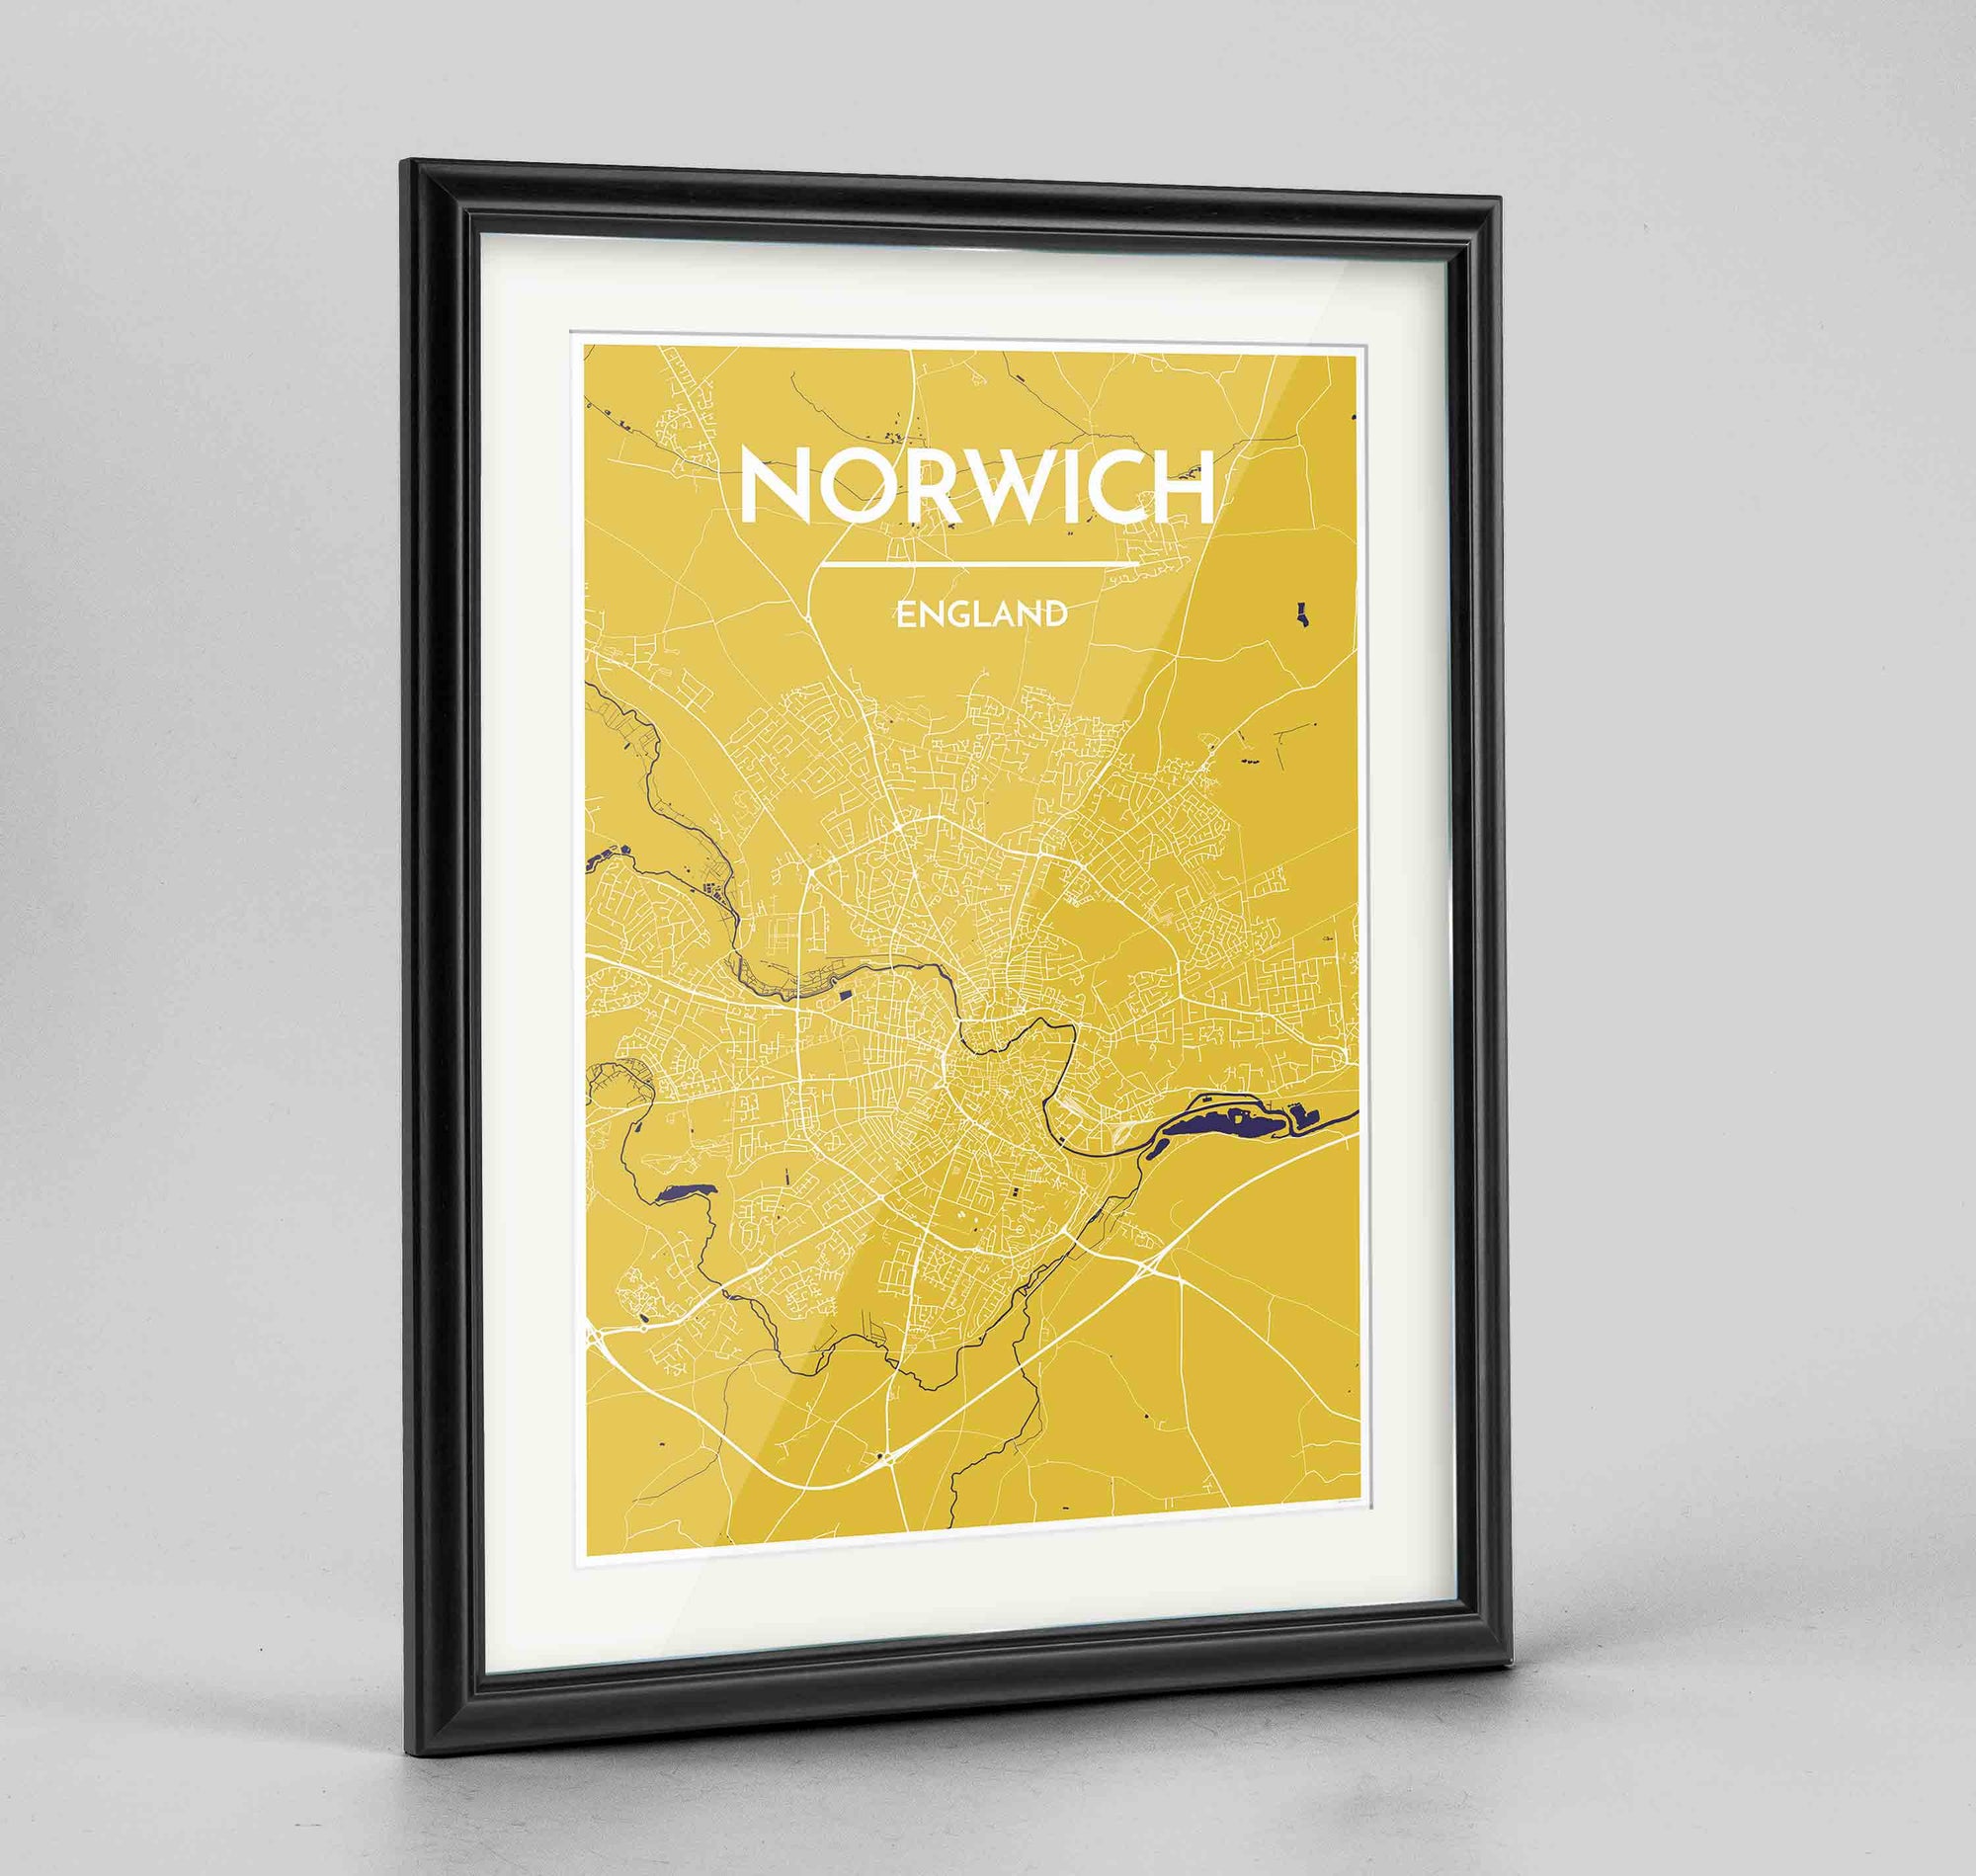 Framed Norwich Map Art Print 24x36" Traditional Black frame Point Two Design Group